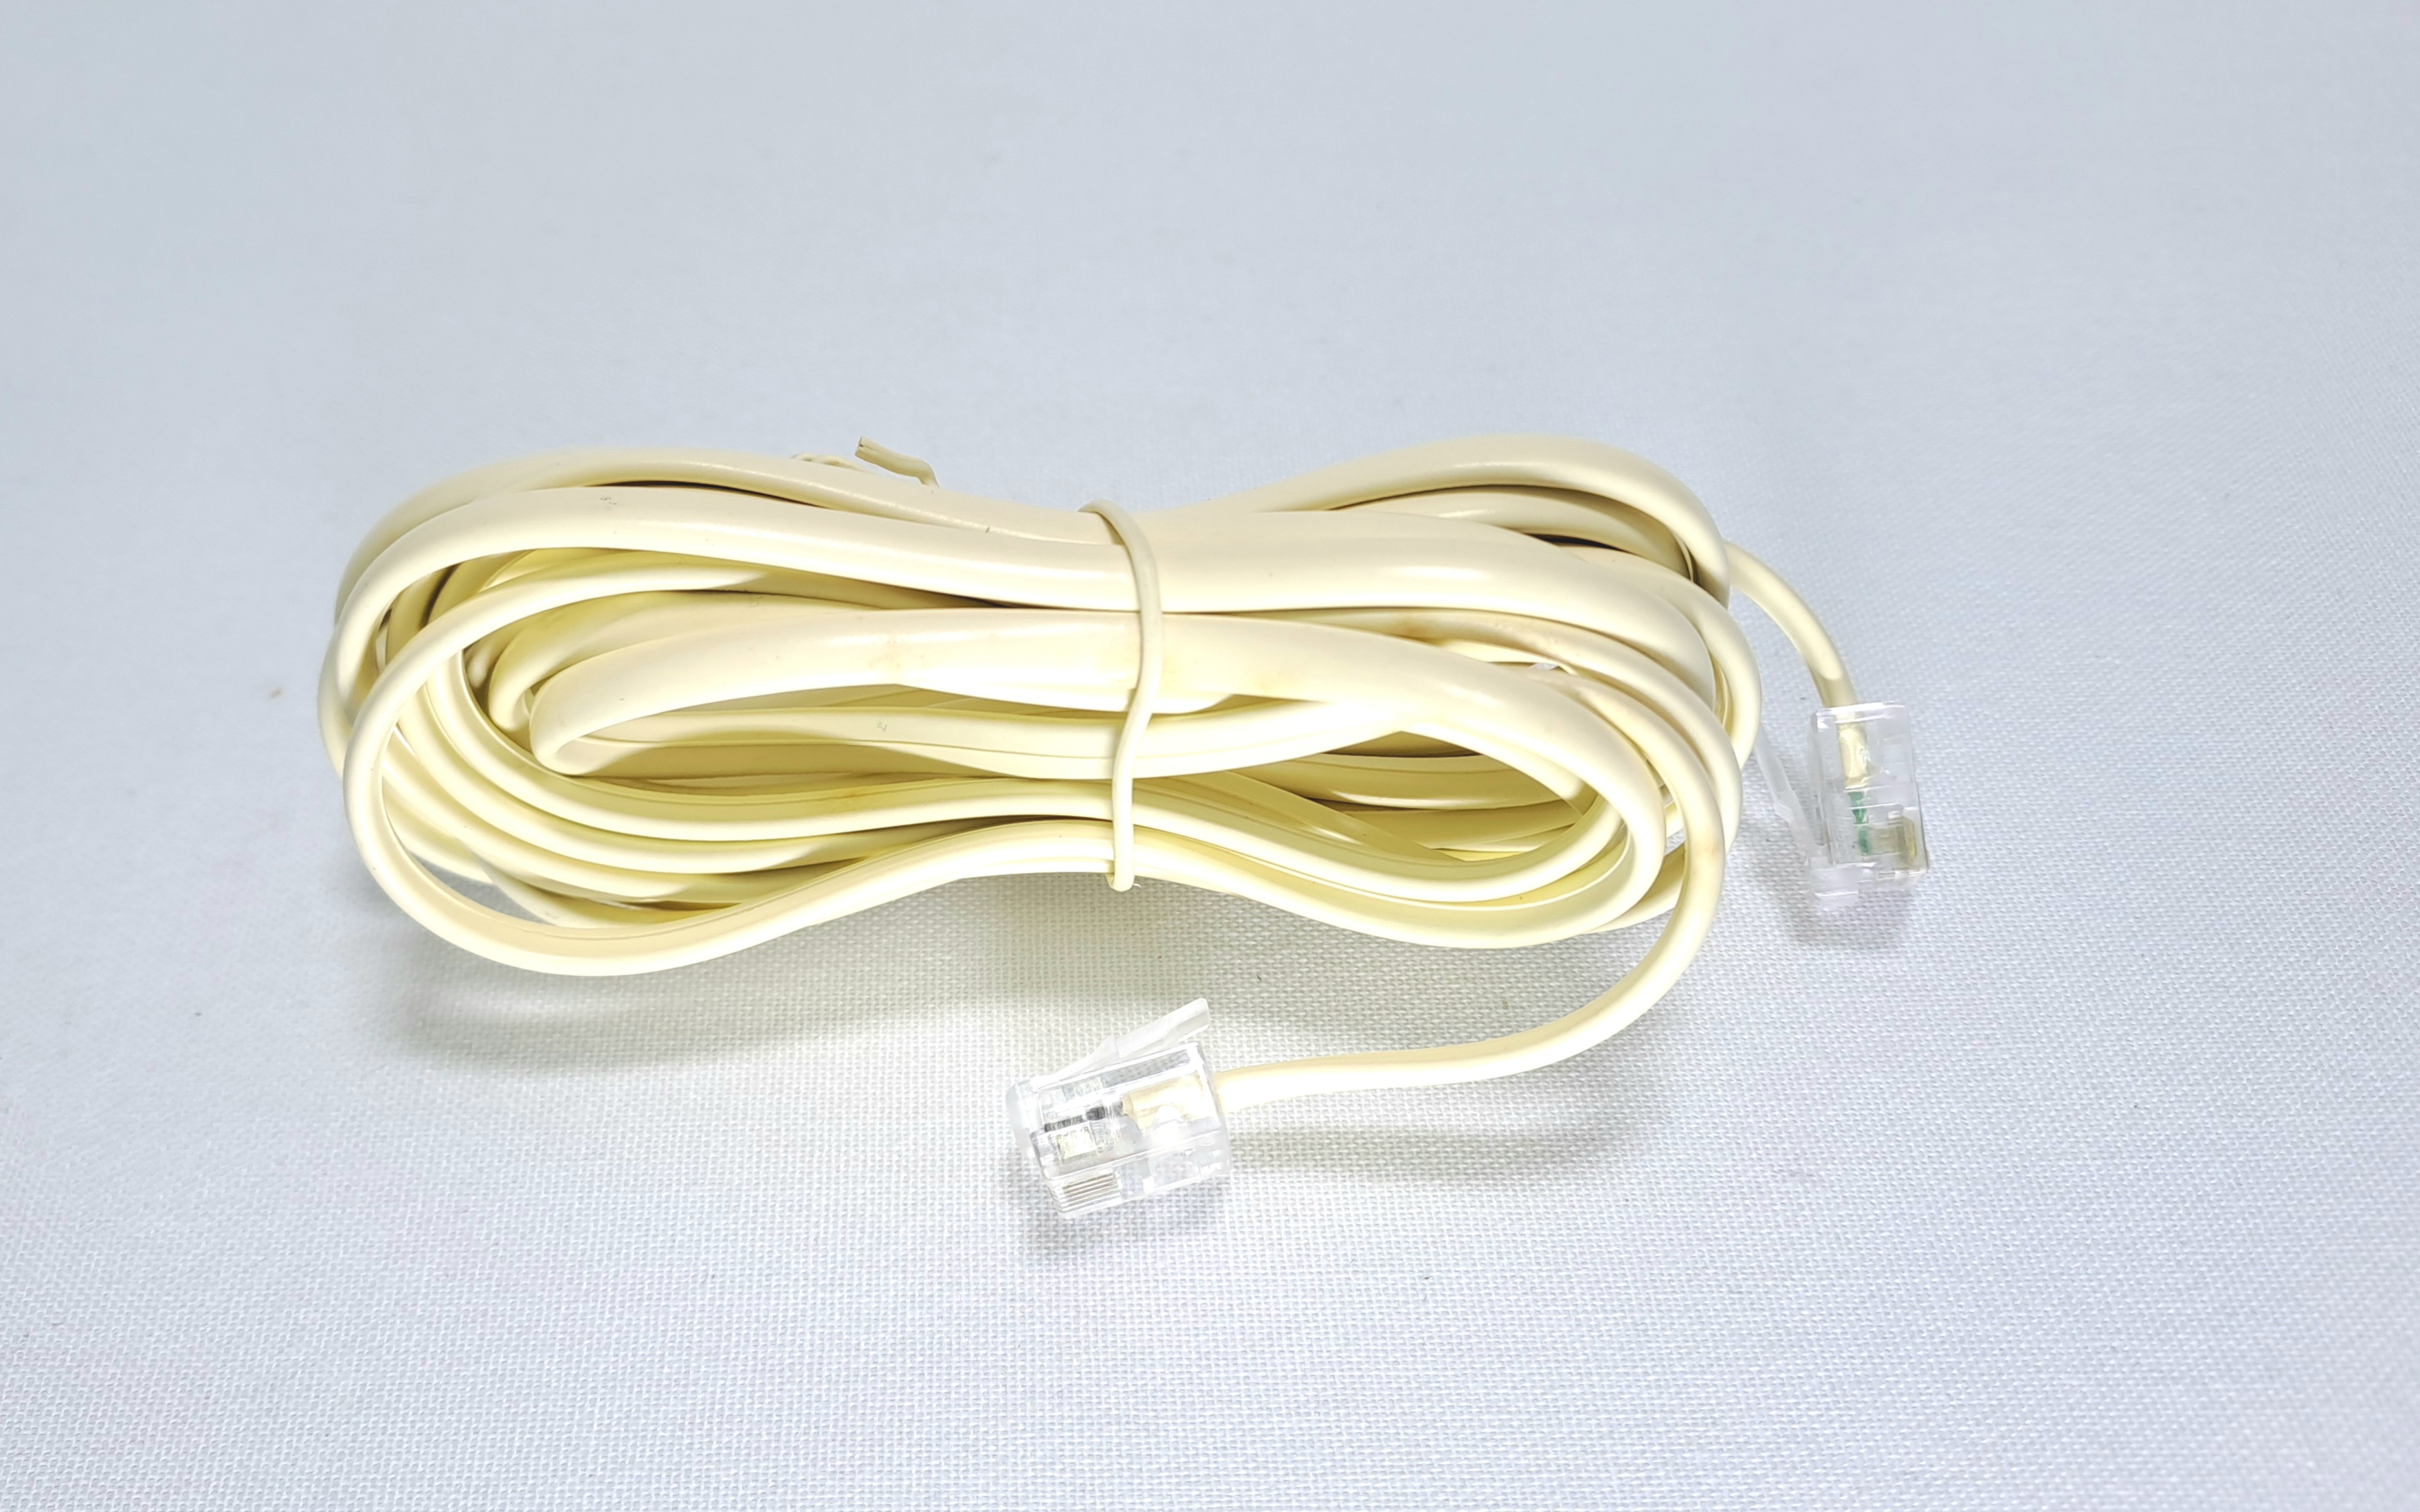 Assembly 4 Core Telephone Cable with RJ11 6P4C Connectors 3m (Beige)